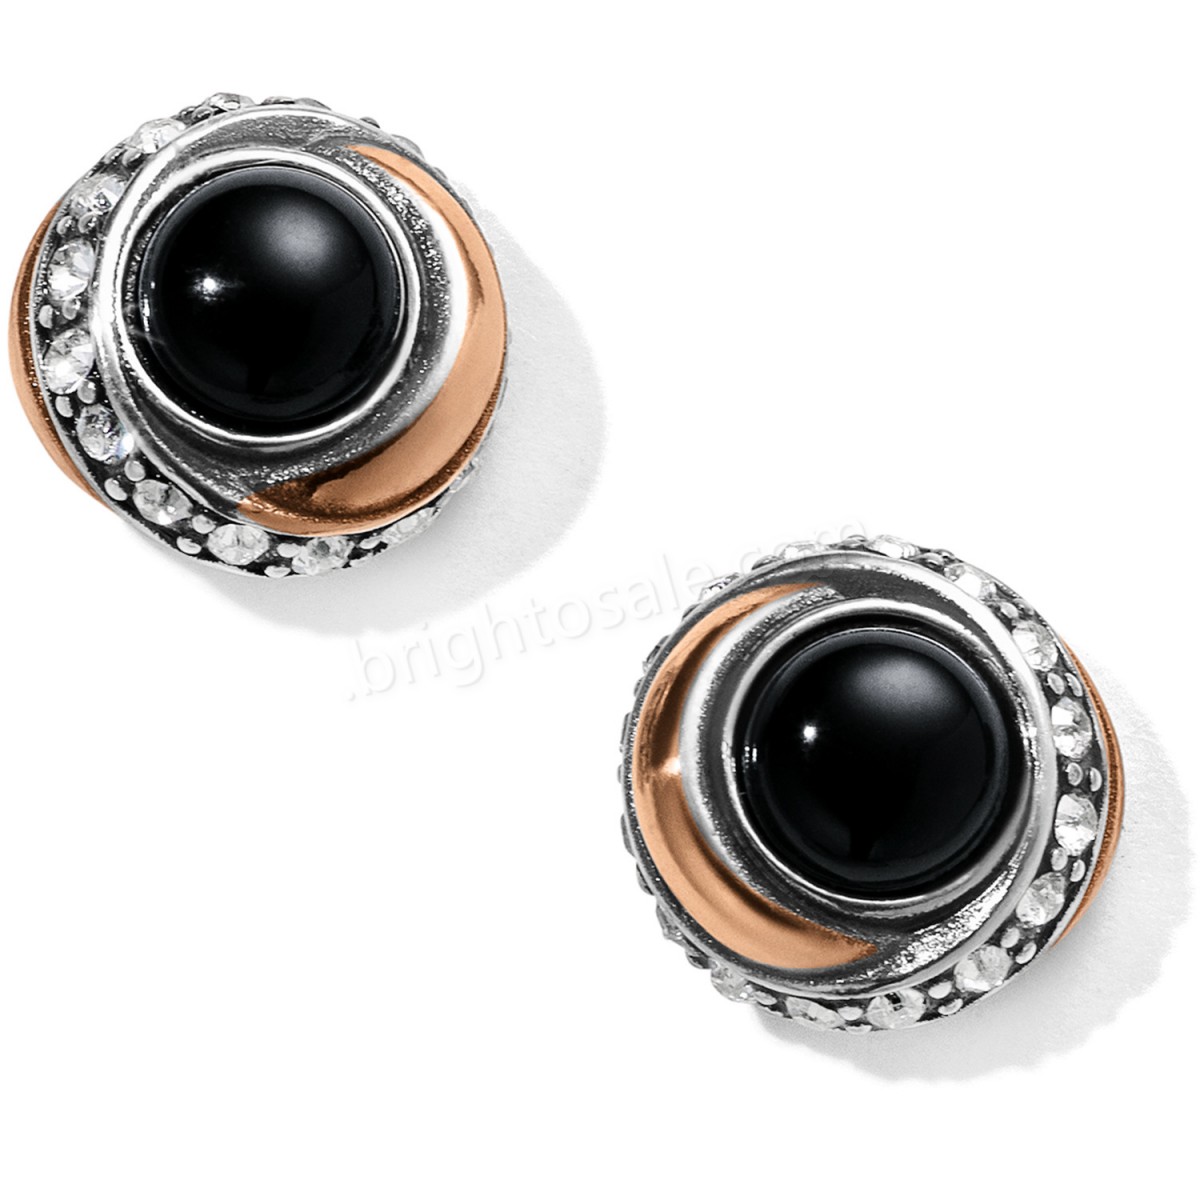 Brighton Collectibles & Online Discount Neptune's Rings Black Agate Button Earrings - -0